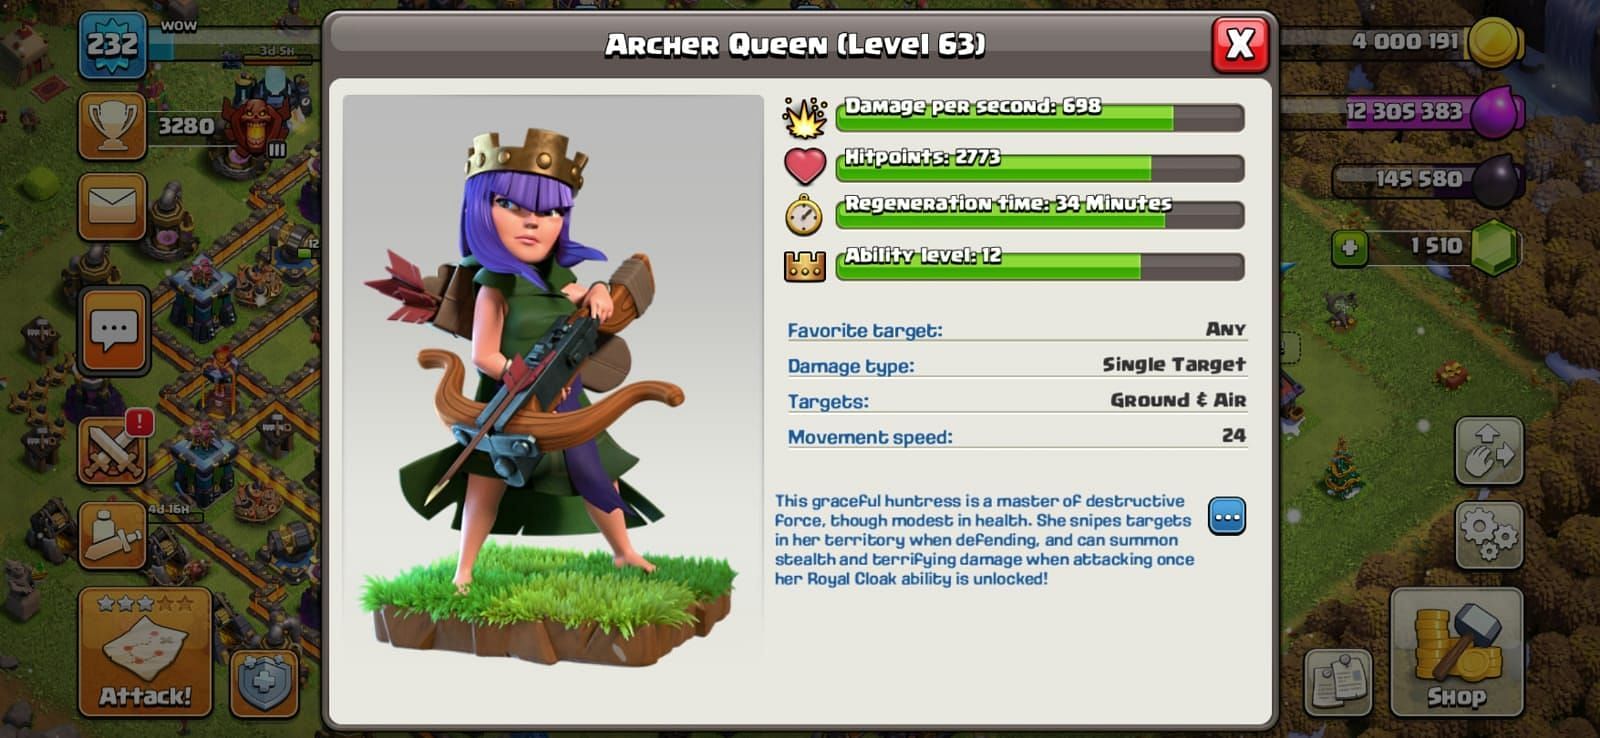 The Archer Queen (Image via Clash of Clans)